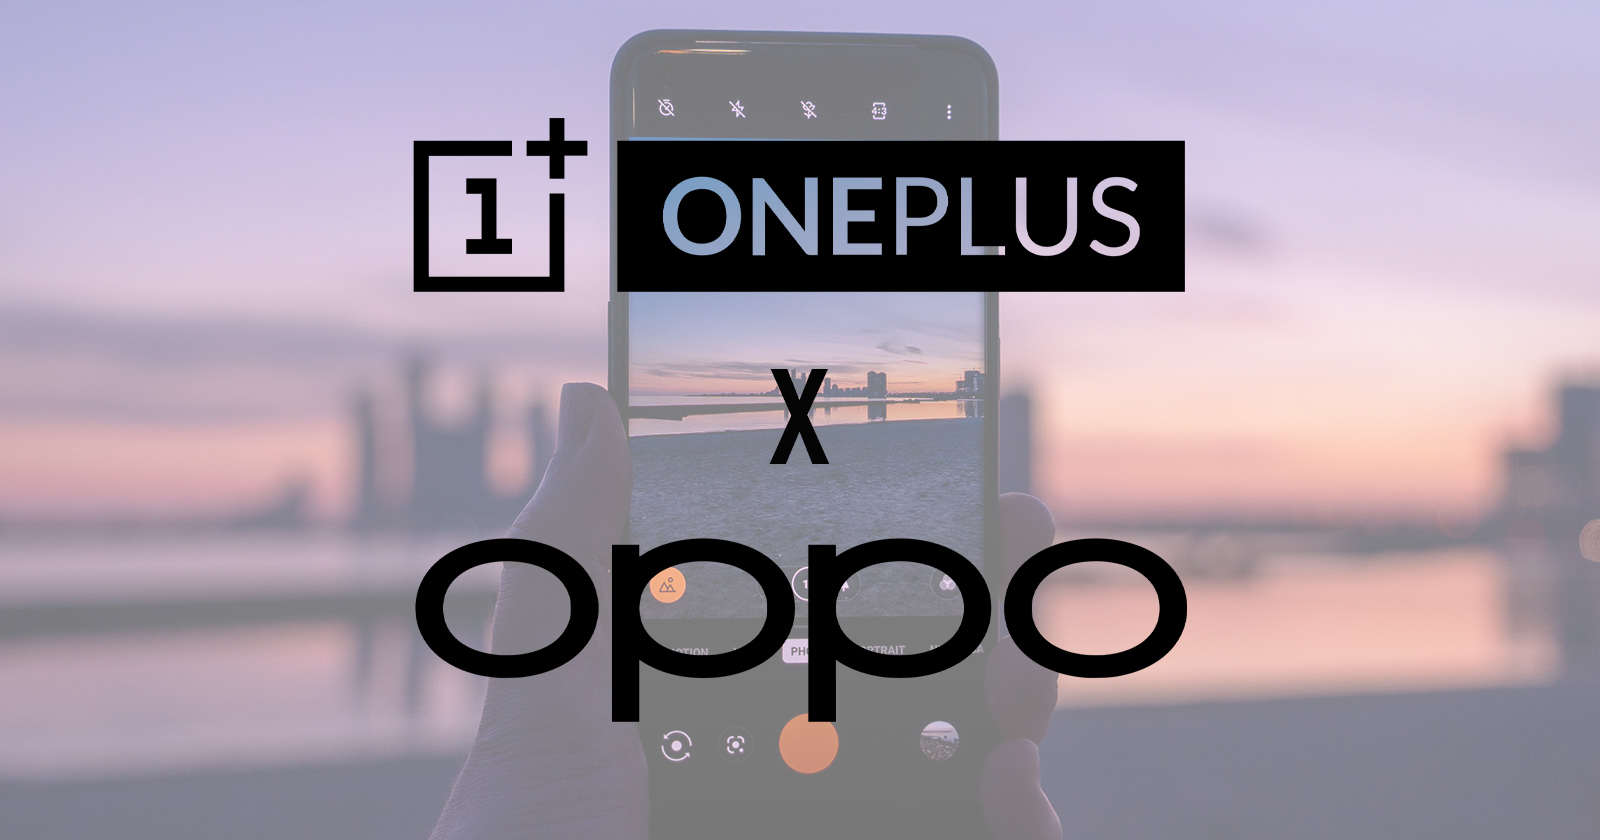 Smartphone Brands OnePlus and Oppo Further Strengthen Ties with a Merger